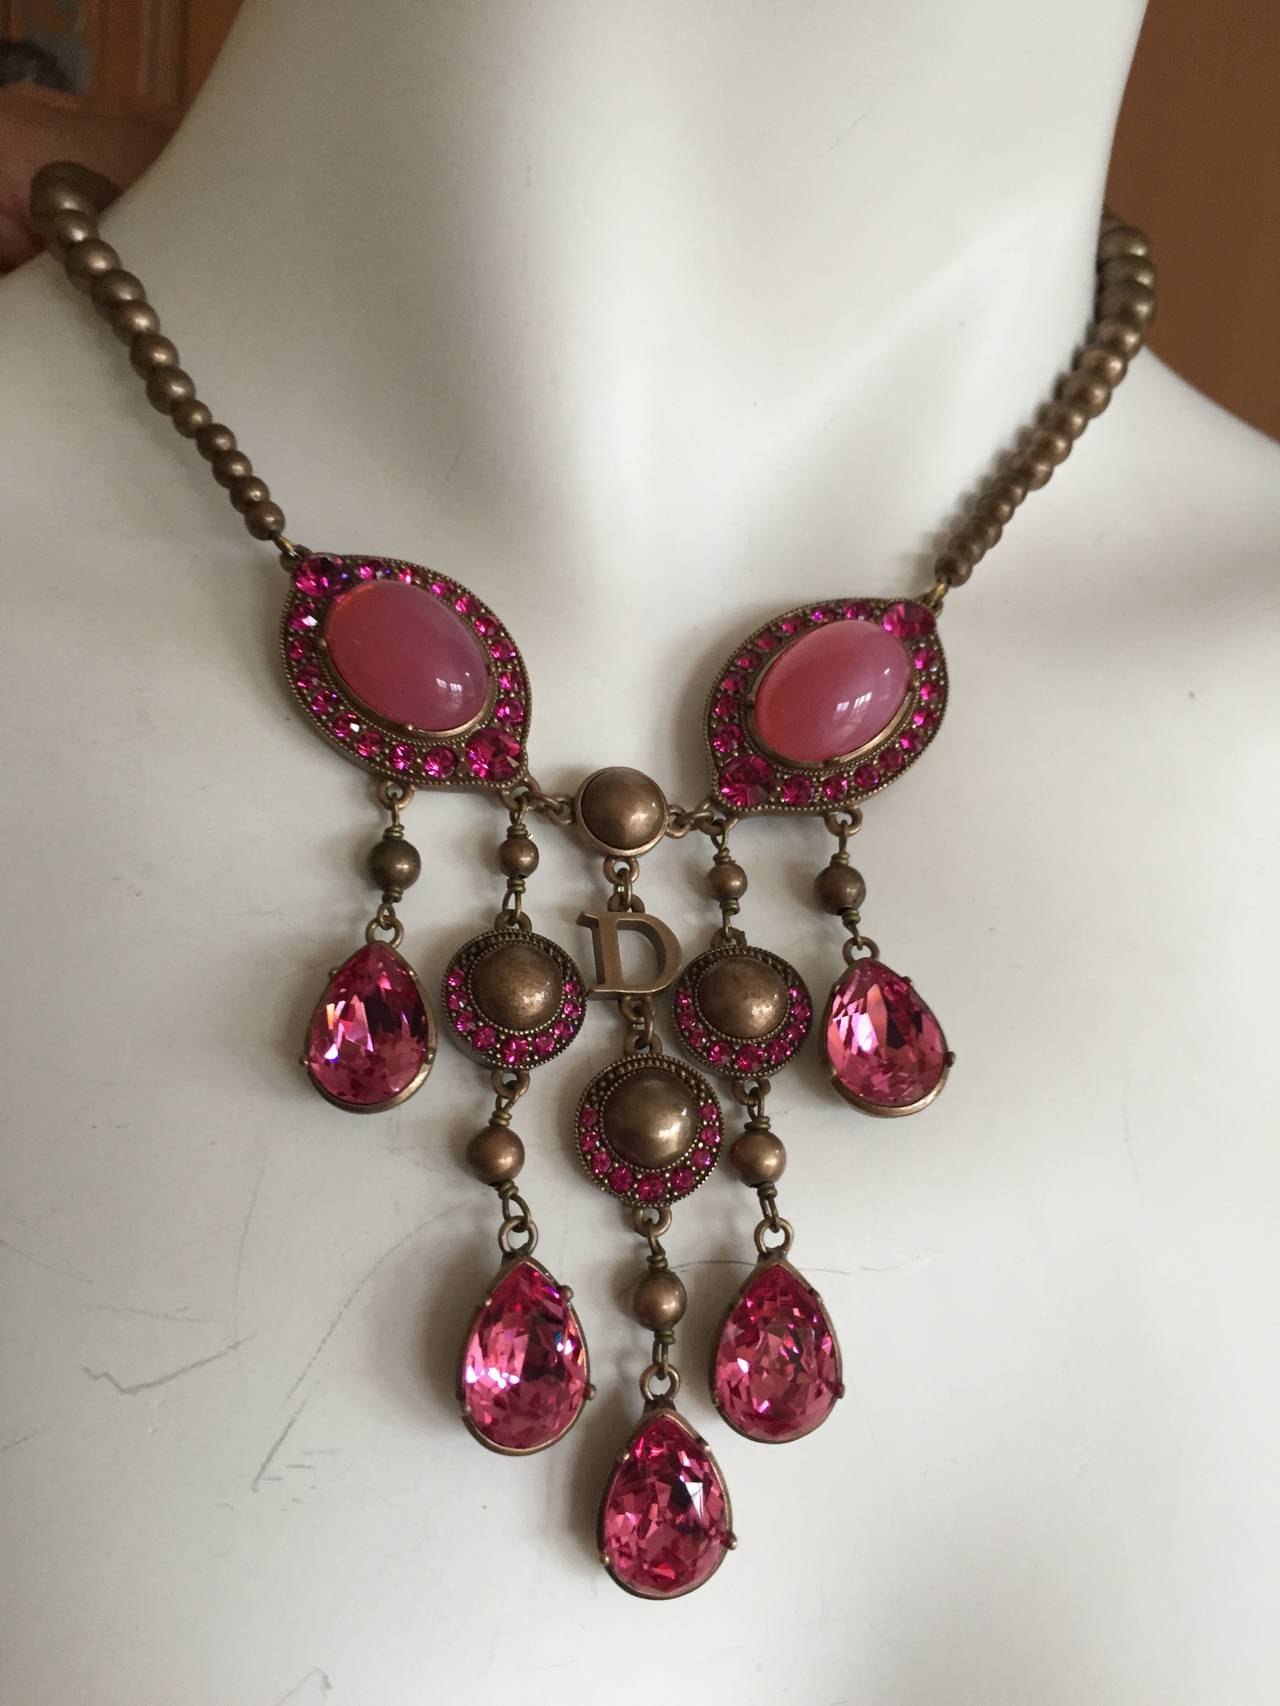 Women's Christian Dior Rose Jeweled Necklace